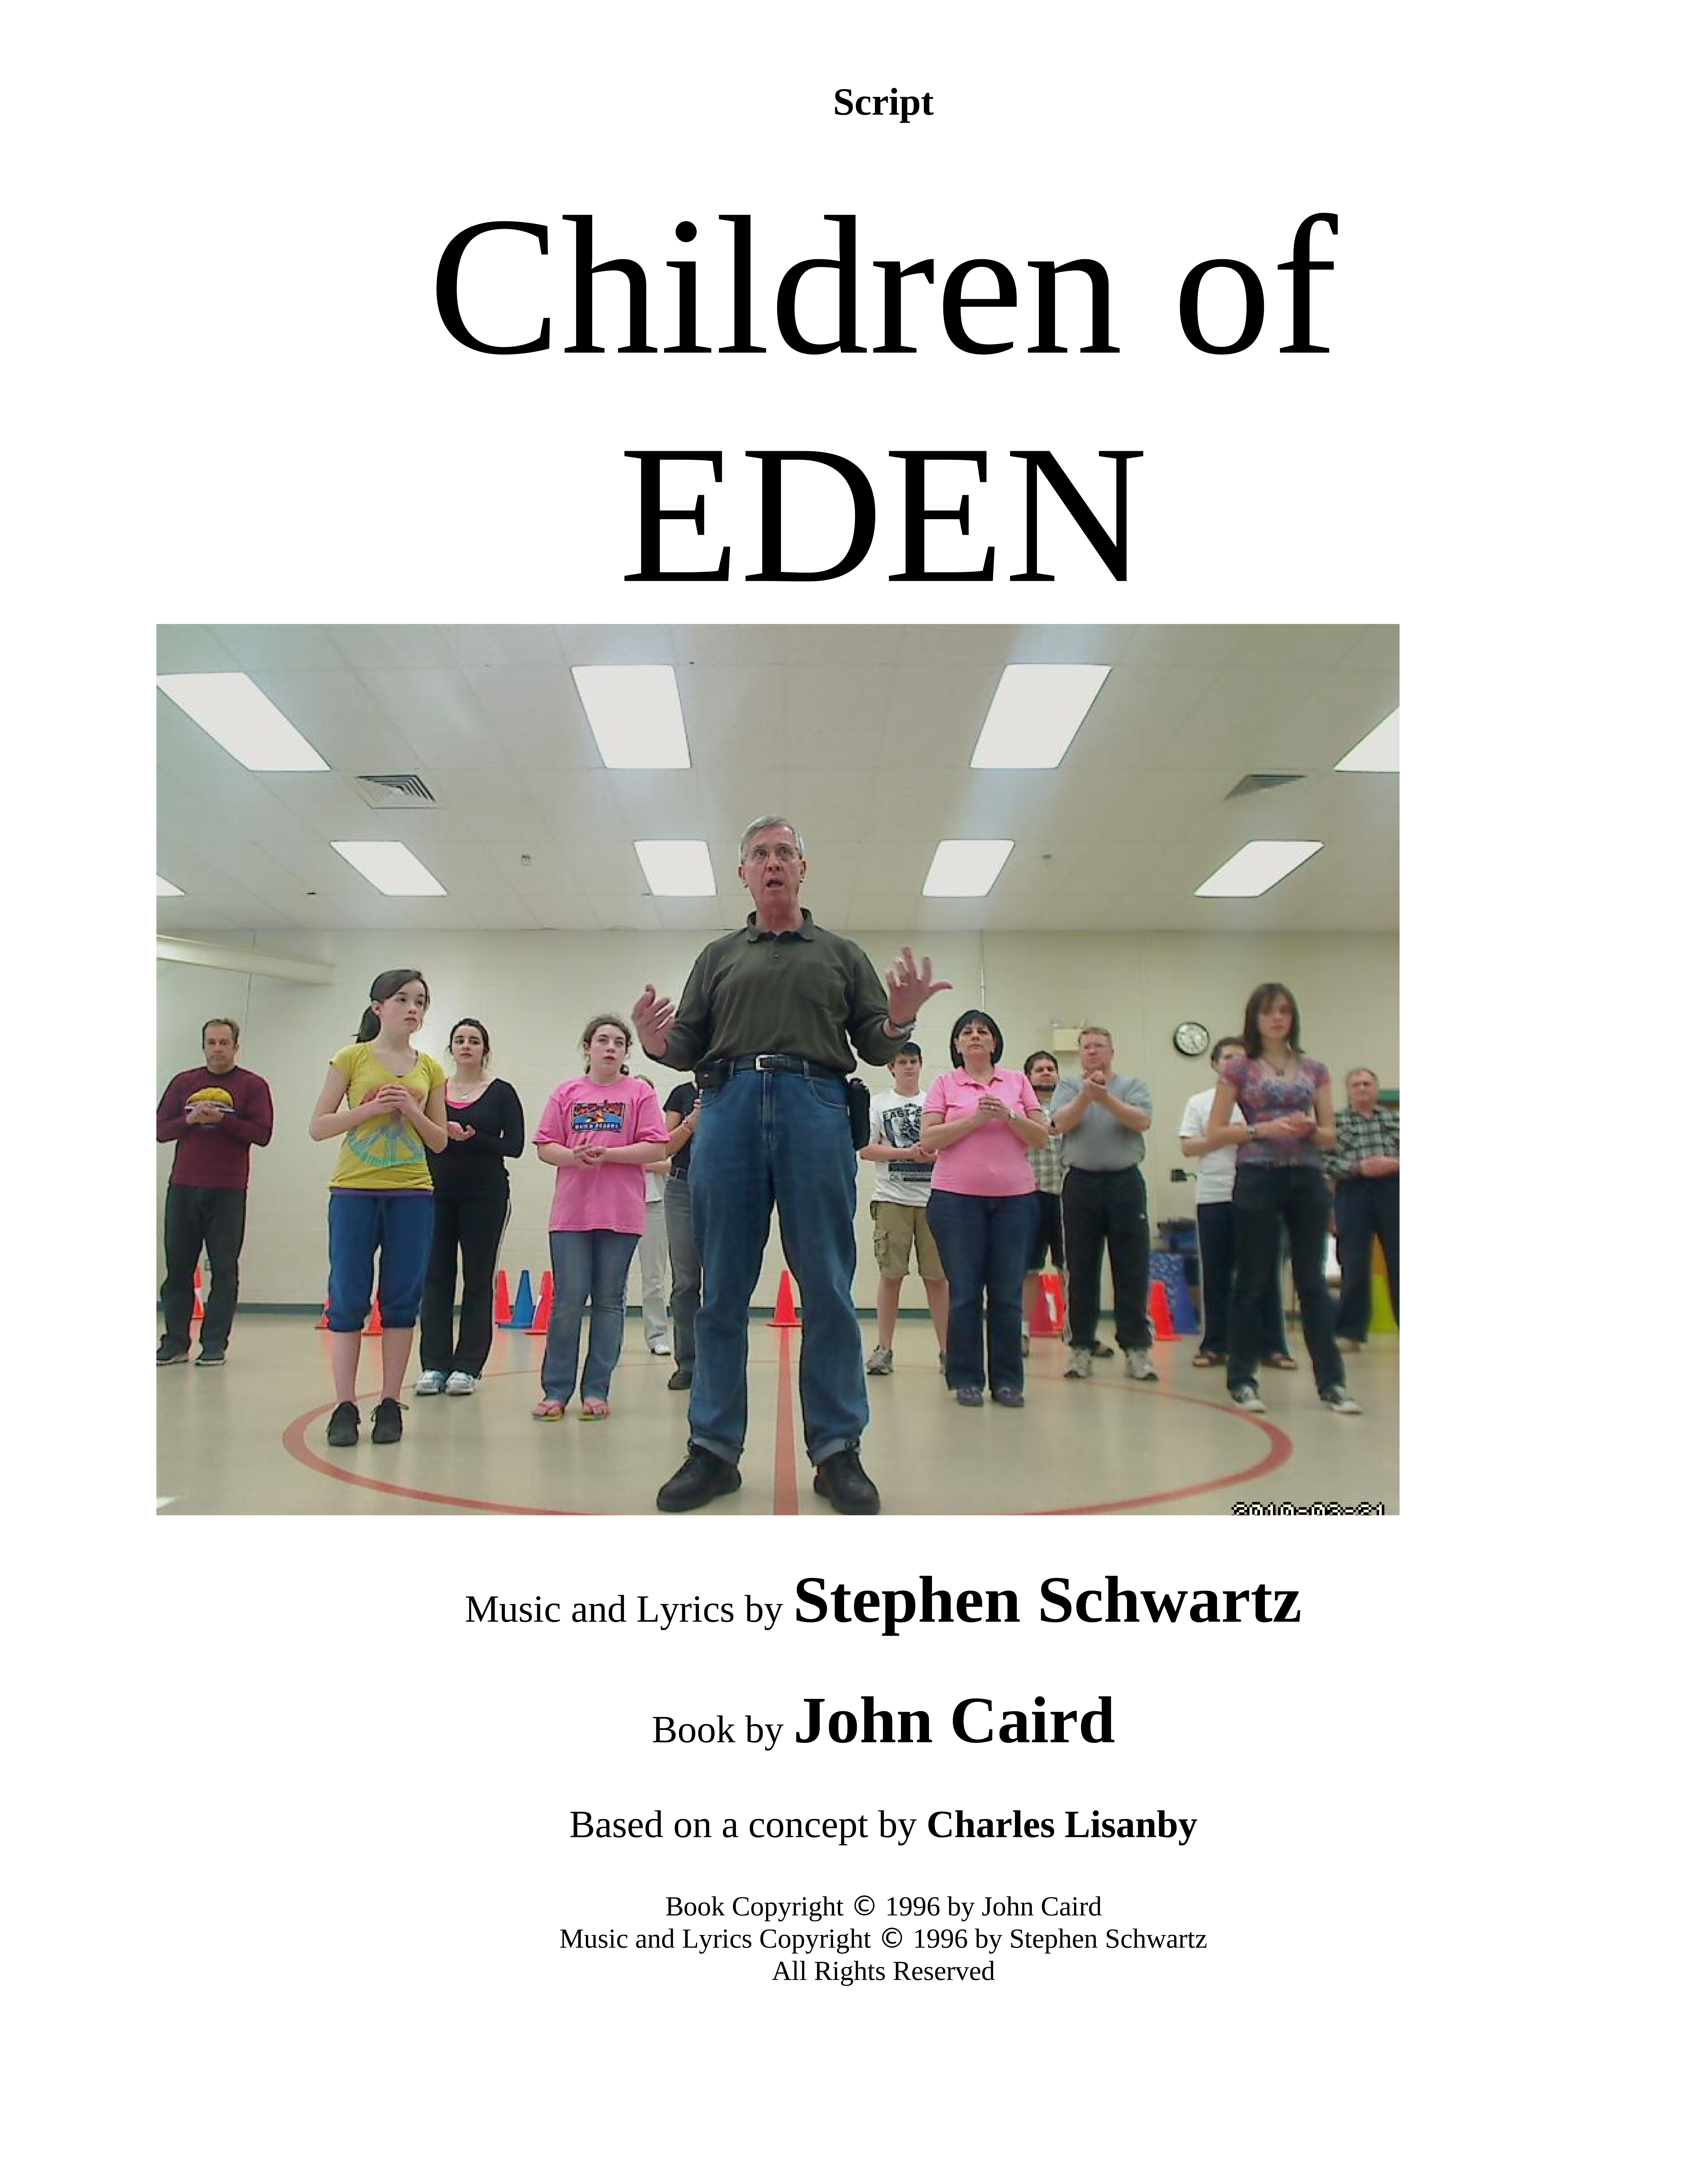 Cover from the script of Children of Eden